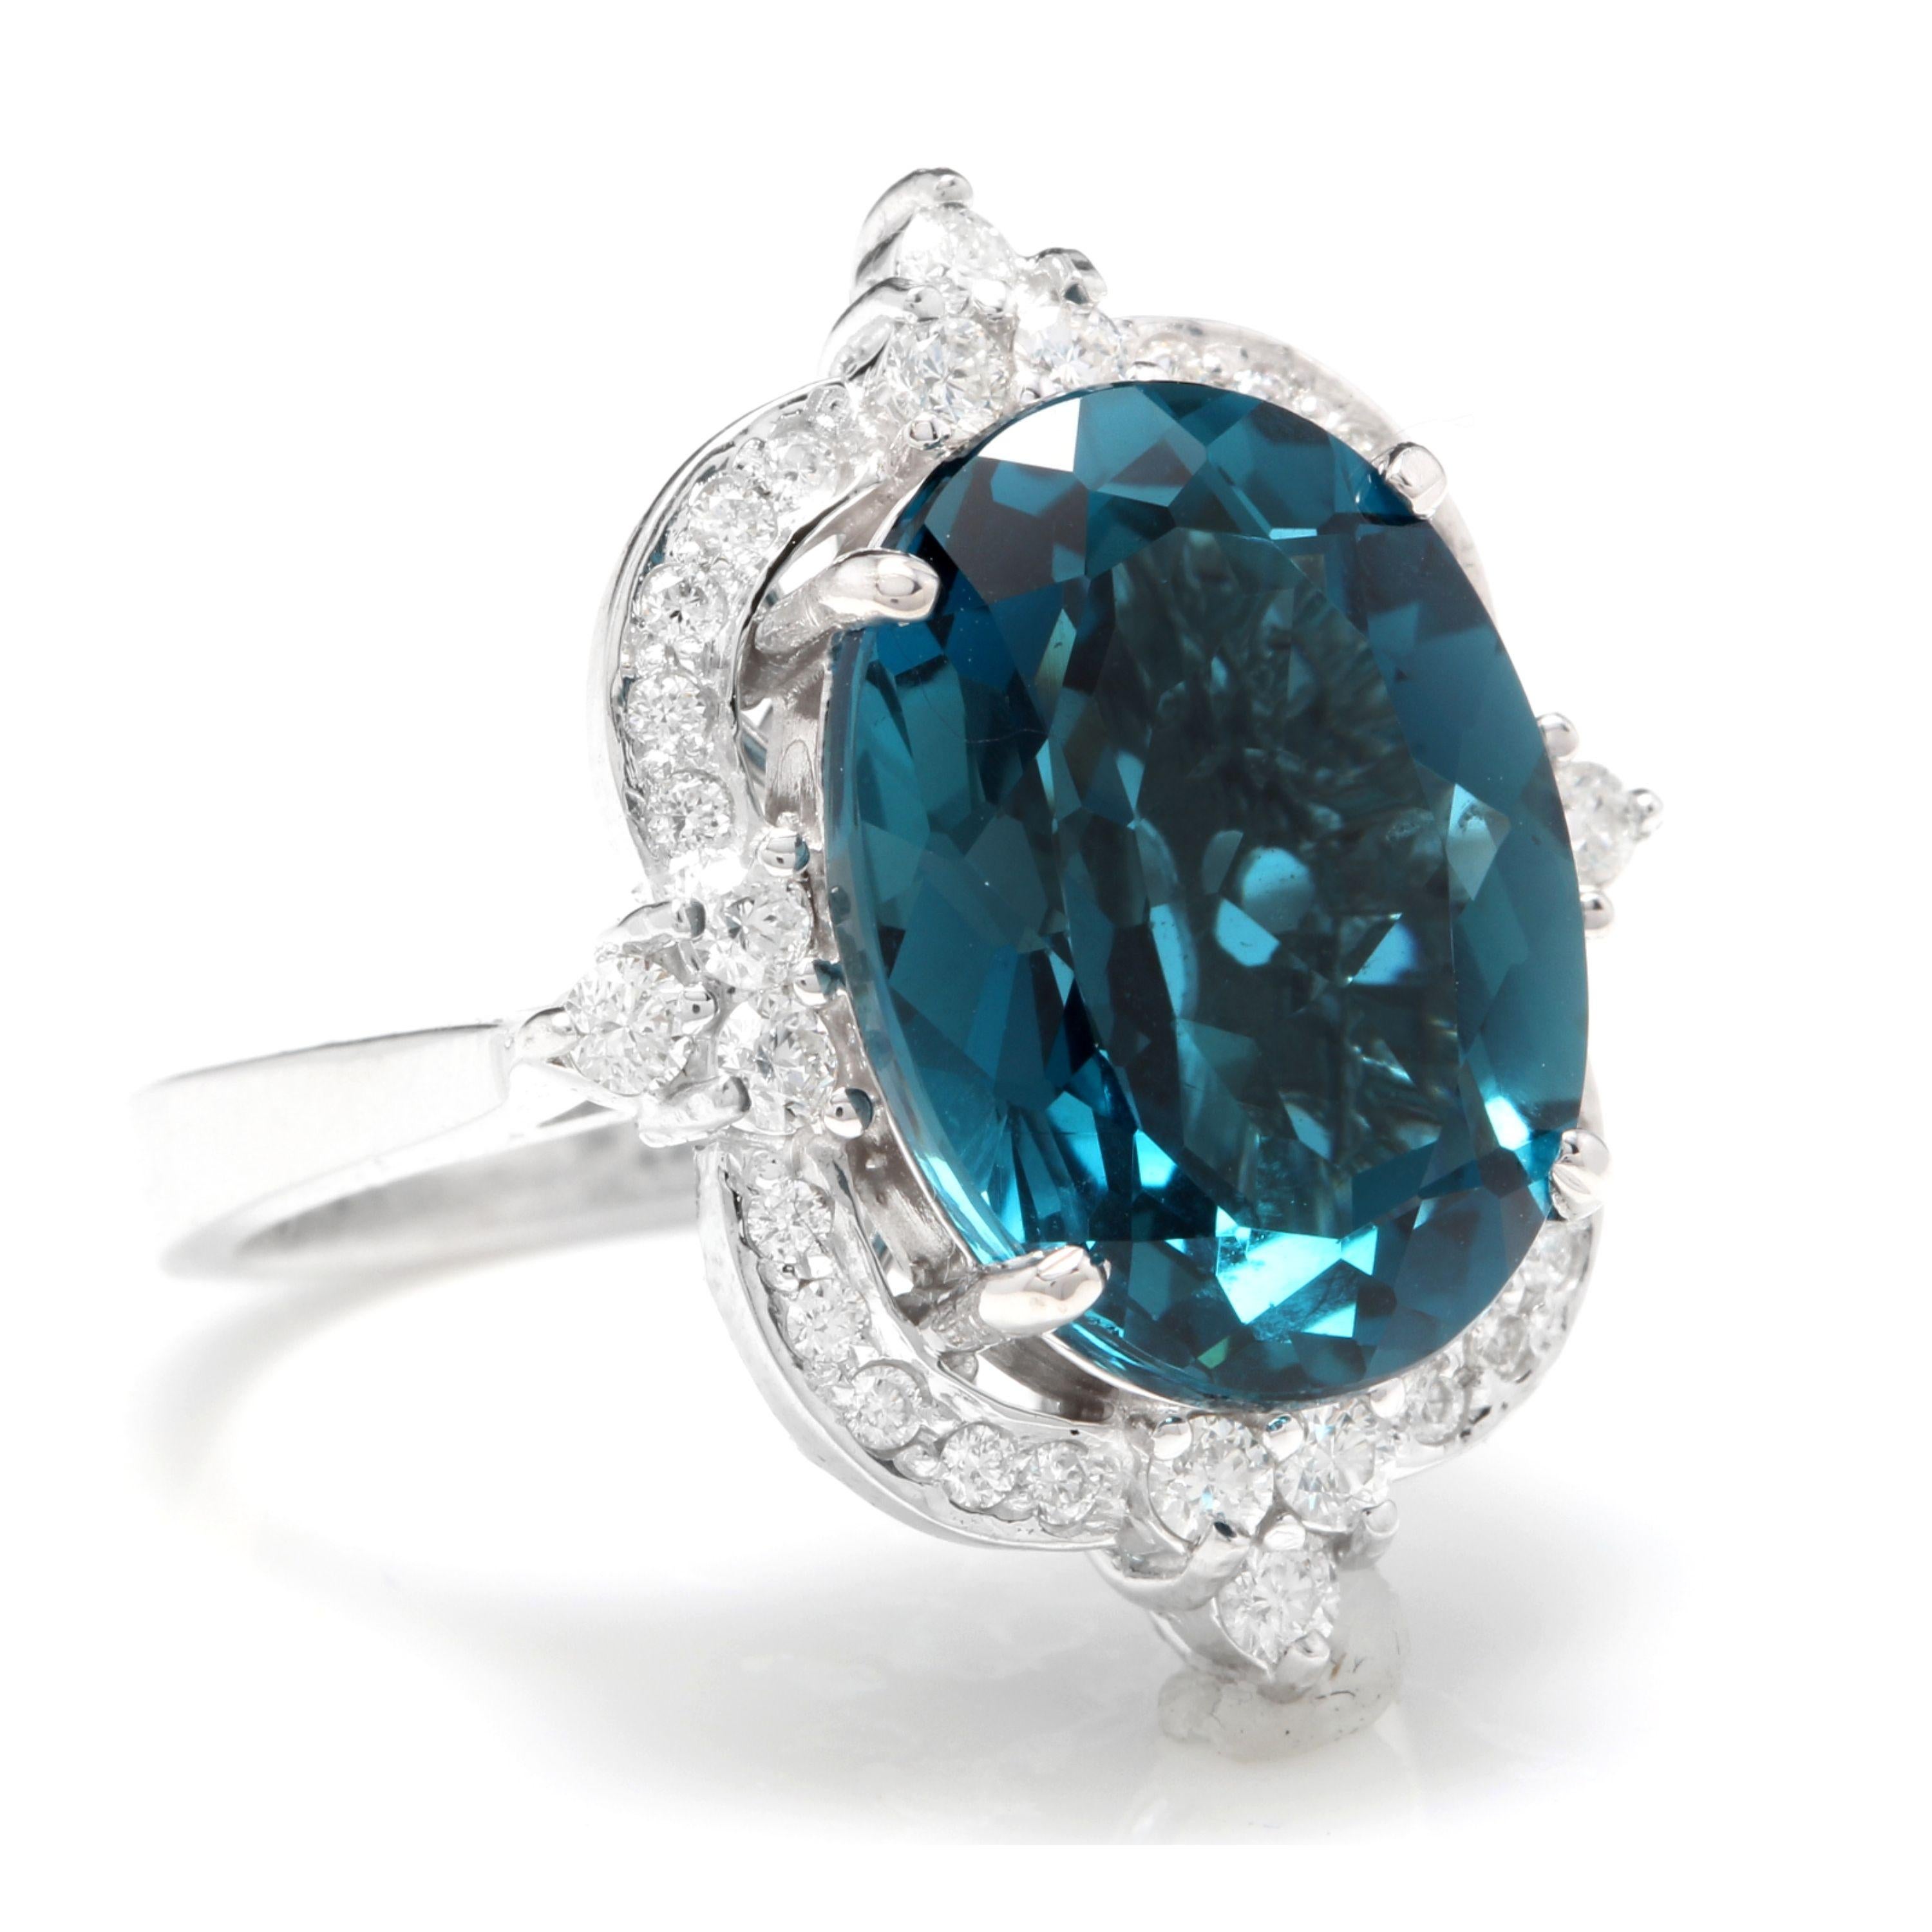 12.75 Carats Natural Impressive London Blue Topaz and Diamond 14K White Gold Ring

Total Natural London Blue Topaz Weight: Approx. 12.00 Carats

London Blue Topaz Measures: Approx. 15 x 11mm

Natural Round Diamonds Weight: .75 Carats (color G-H /